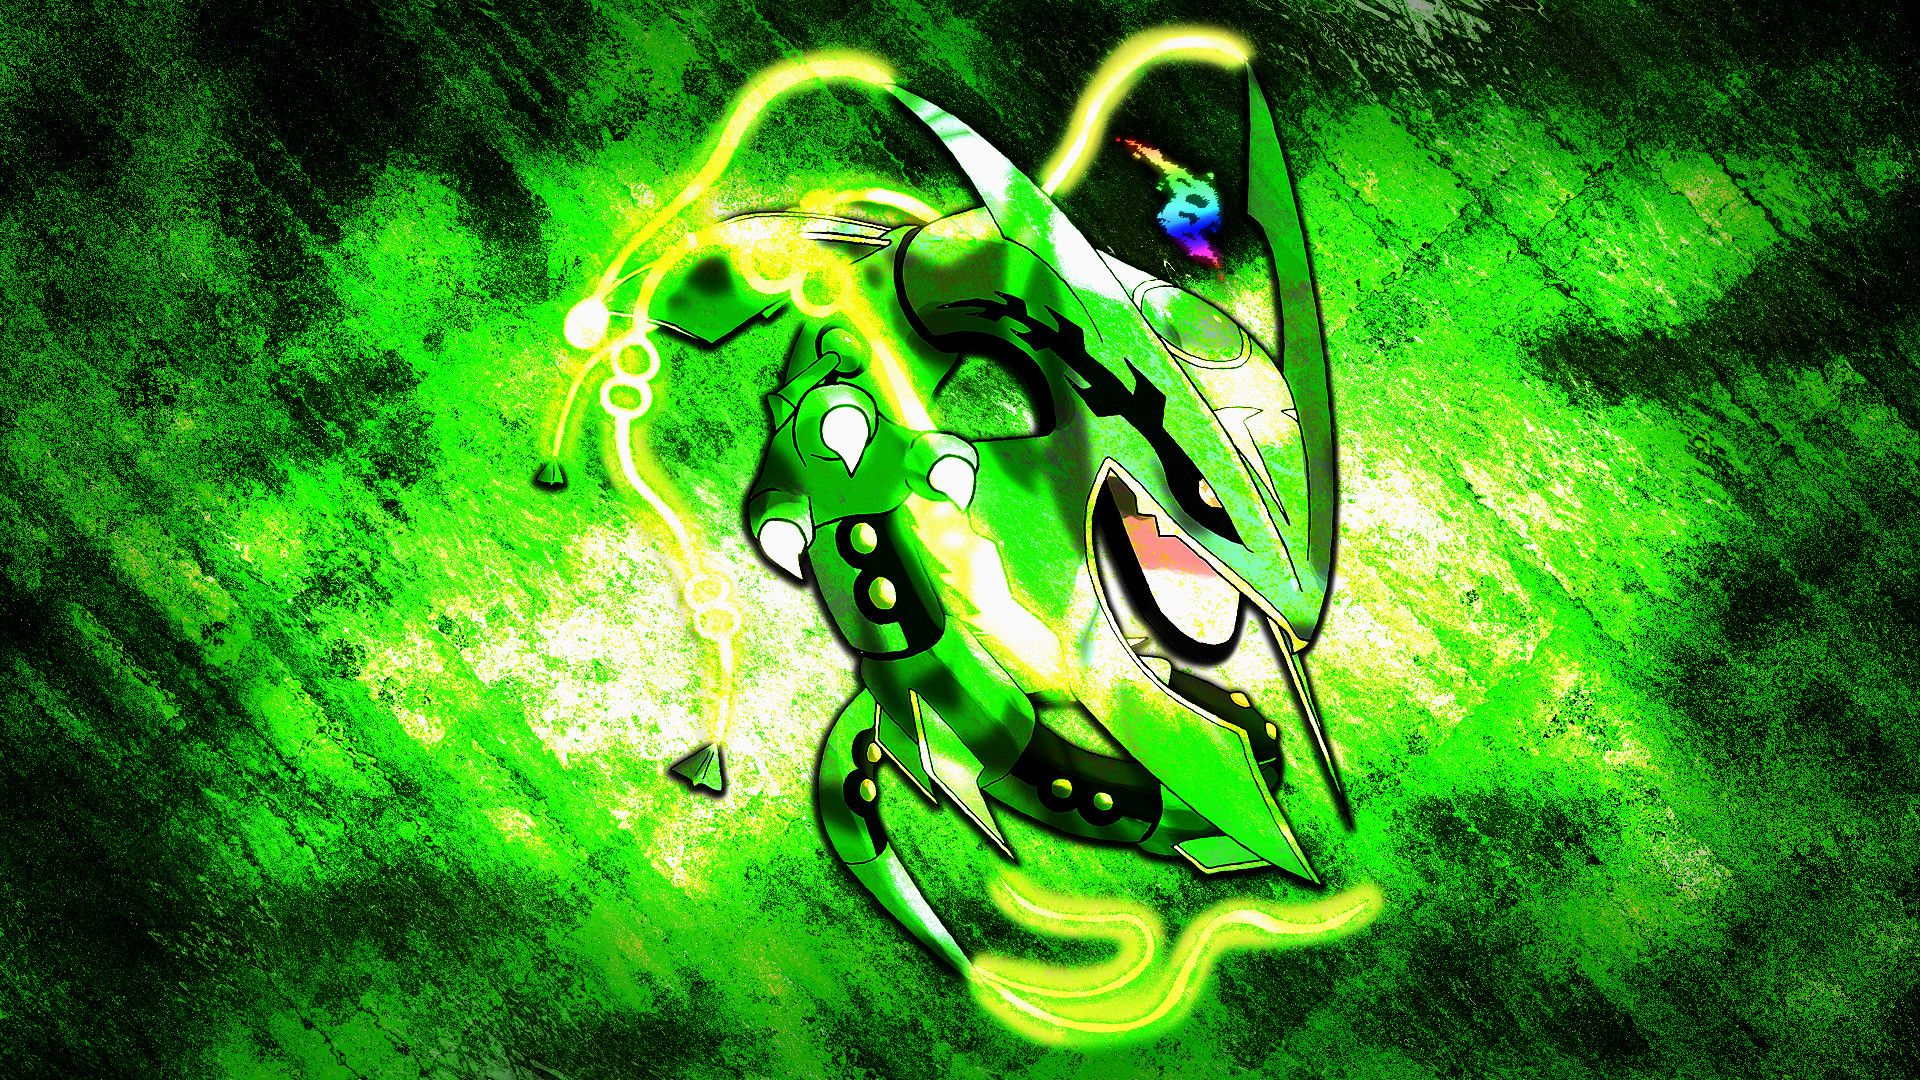 Rayquaza Wallpapers 4k Hd Rayquaza Backgrounds On Wallpaperbat